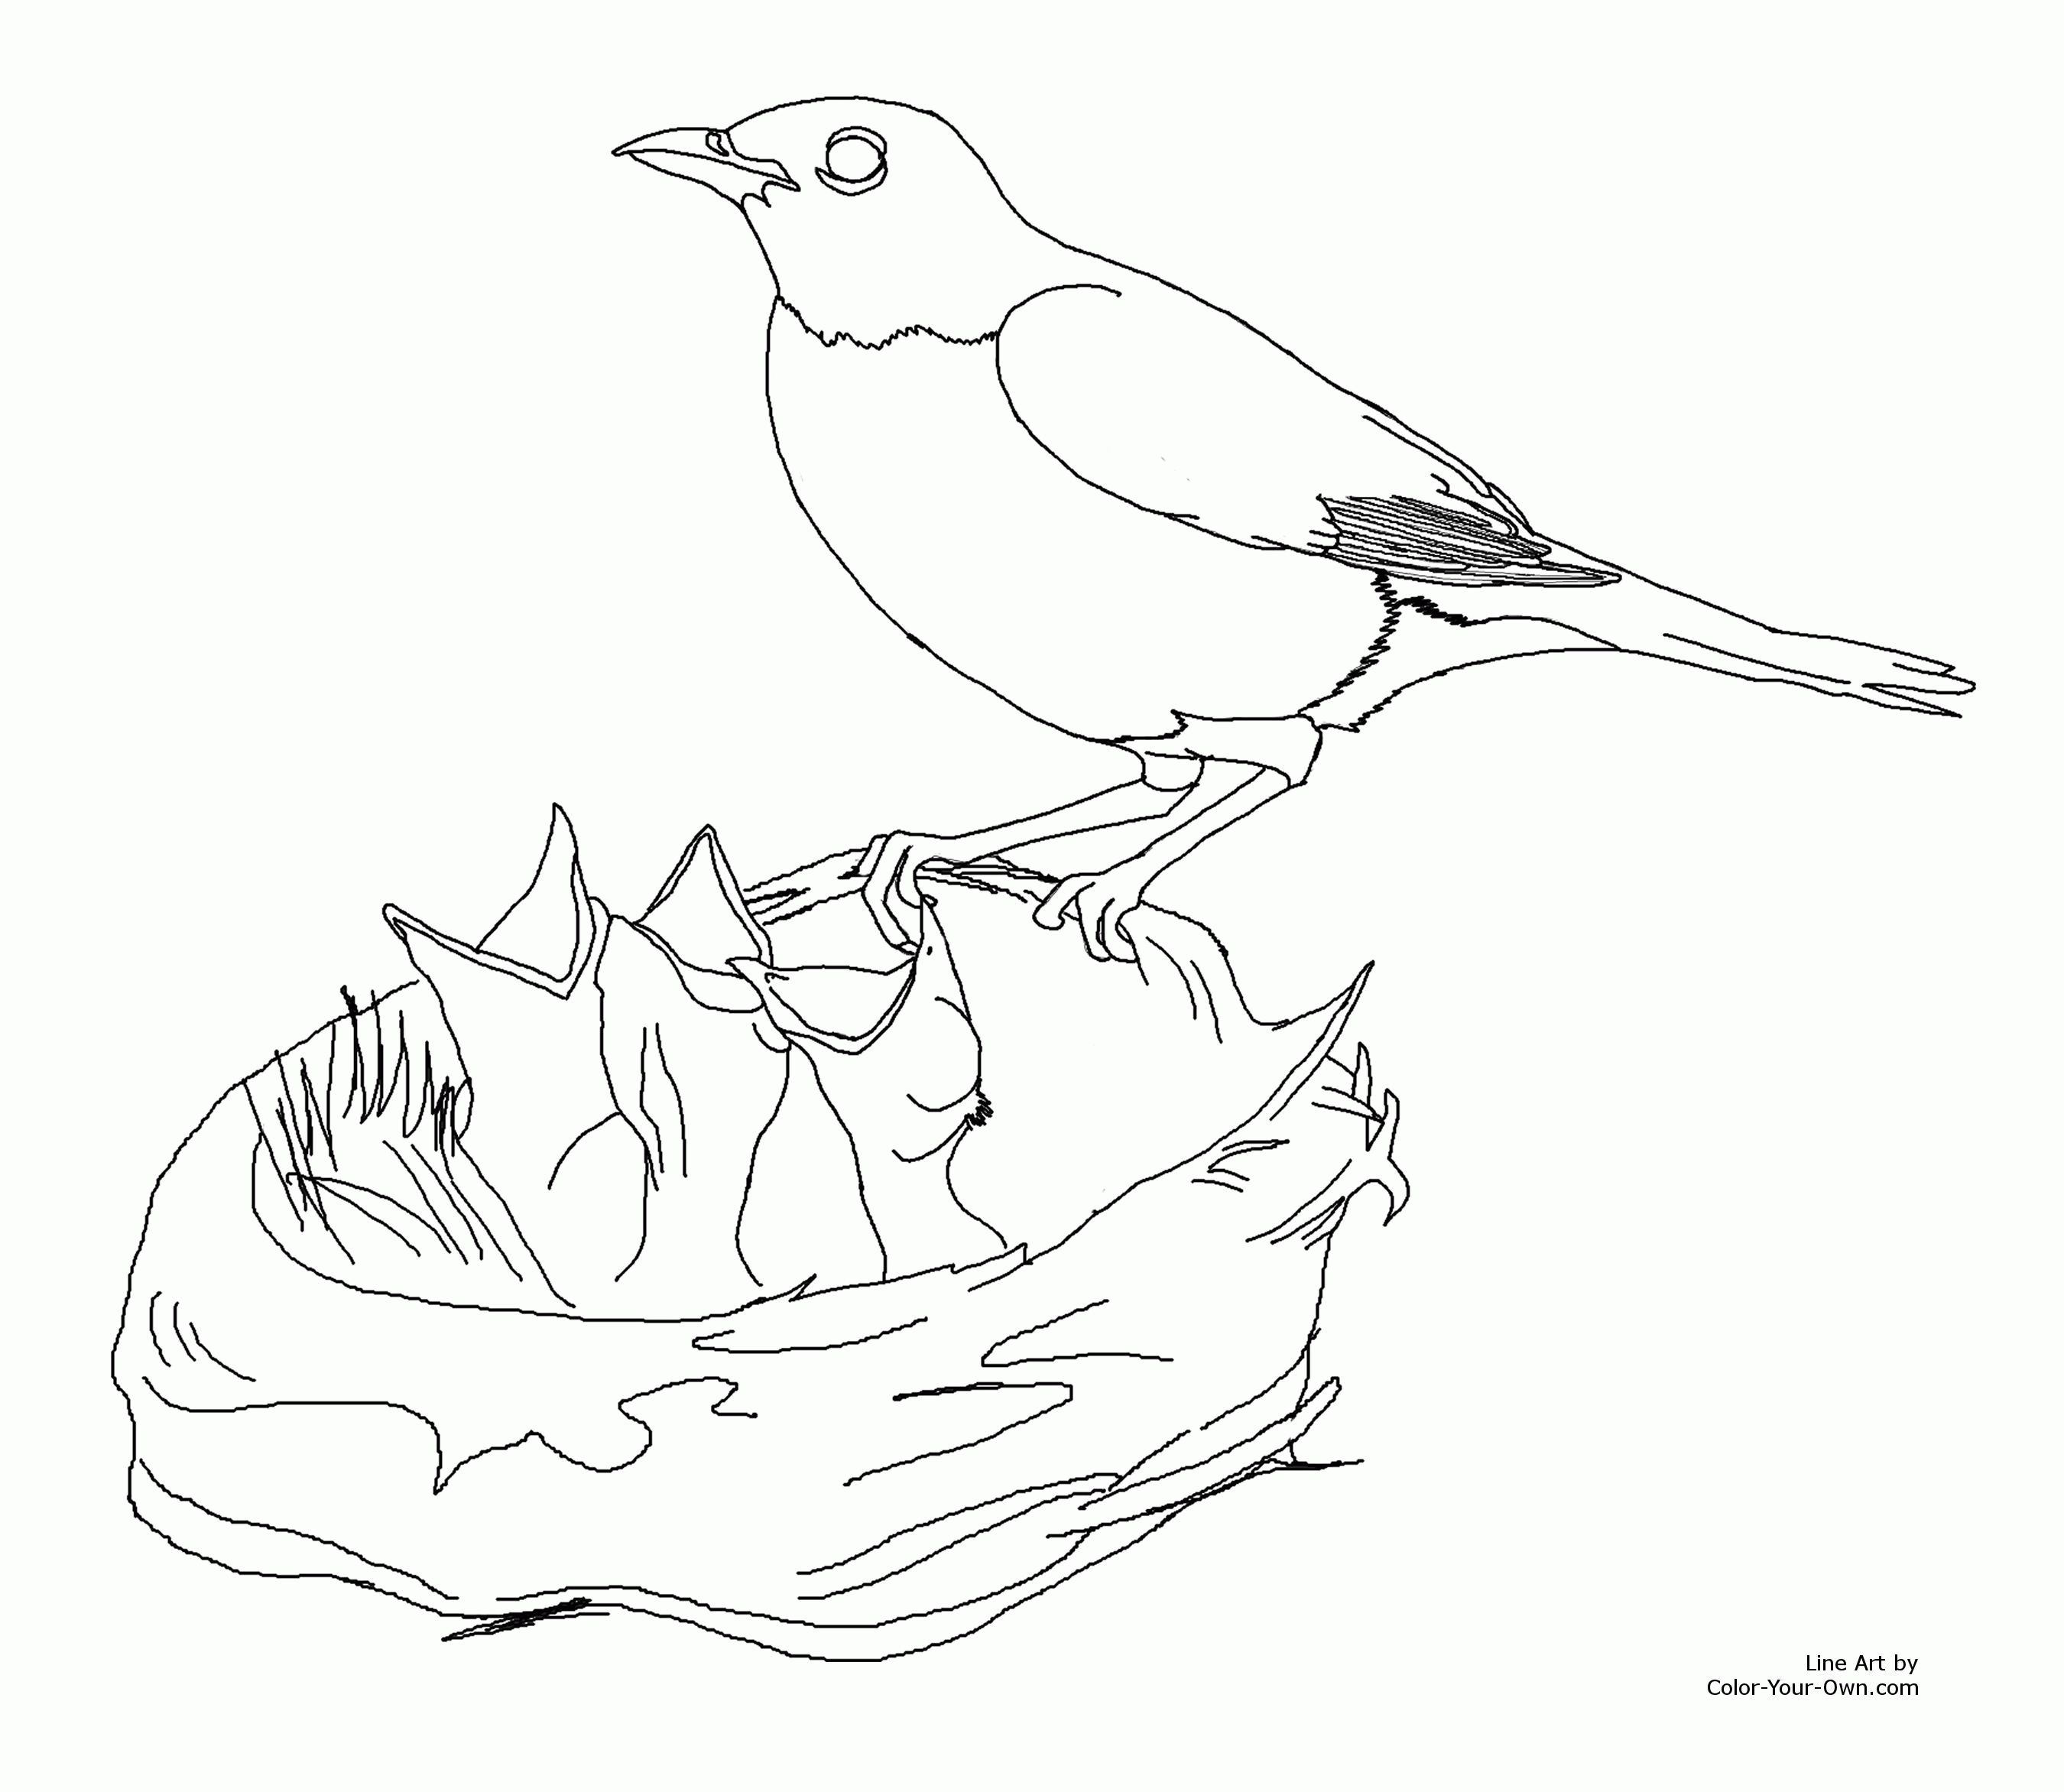 New Coloring Page for Spring - Mother Robin feeding baby birds ...